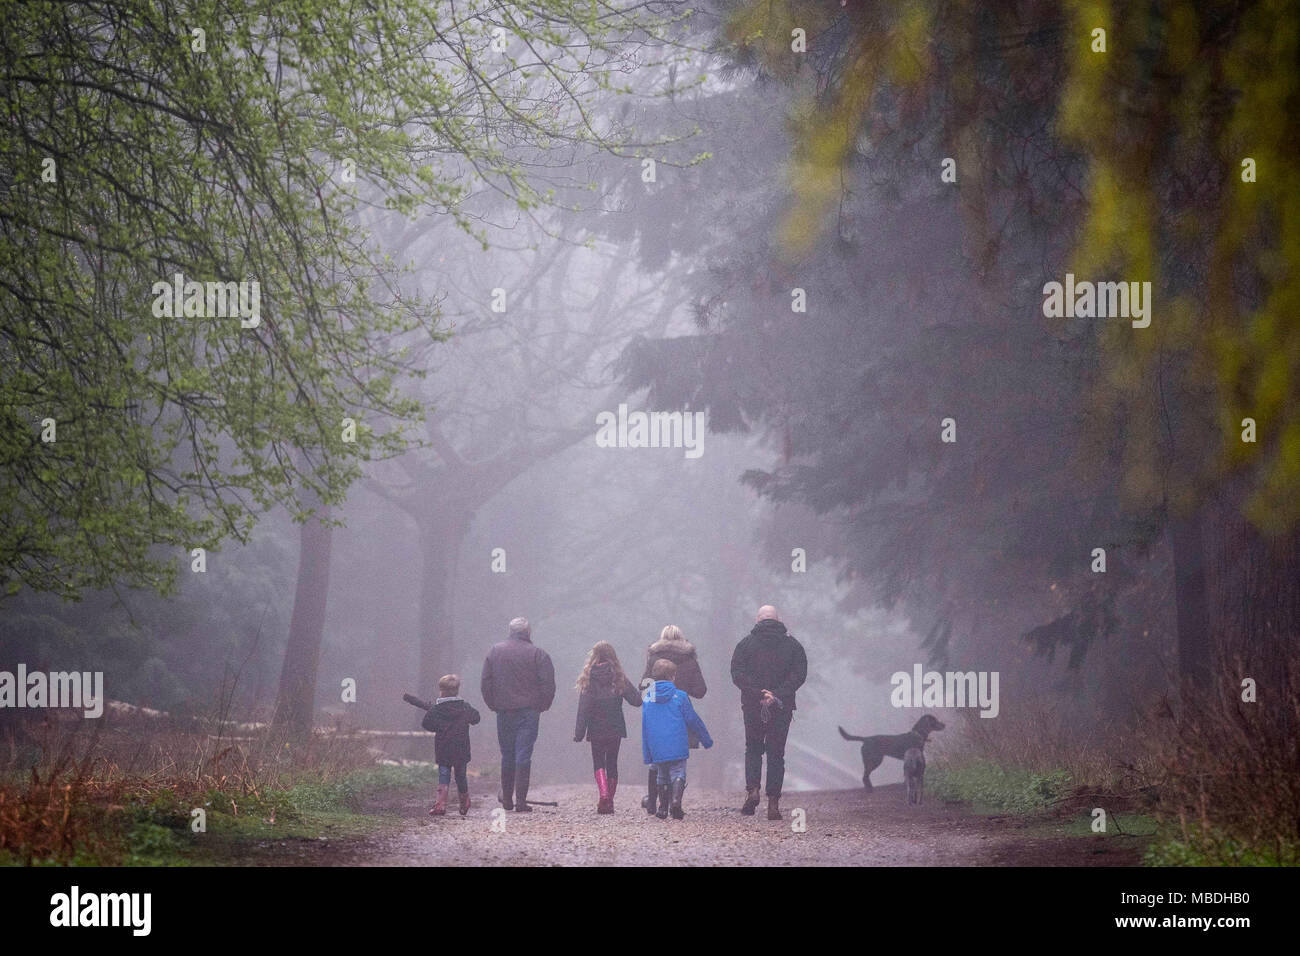 A family walk through the mist in Epping Forest, London, as the seasonal wet weather continues. Stock Photo